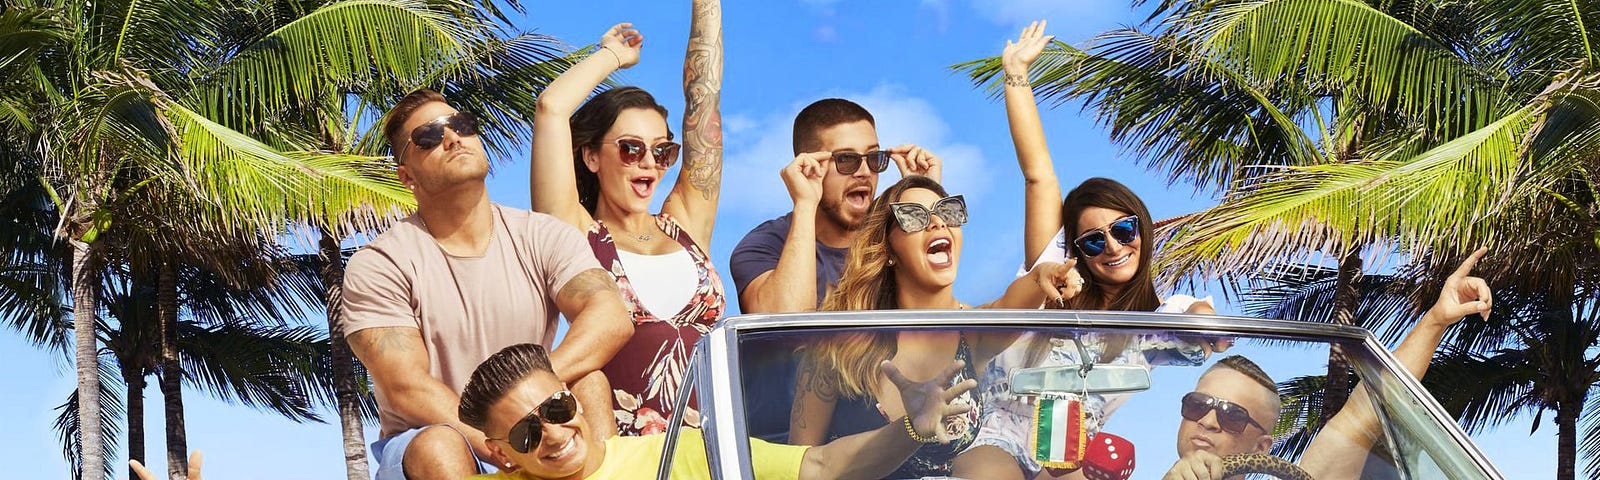 jersey shore family vacation full free episodes